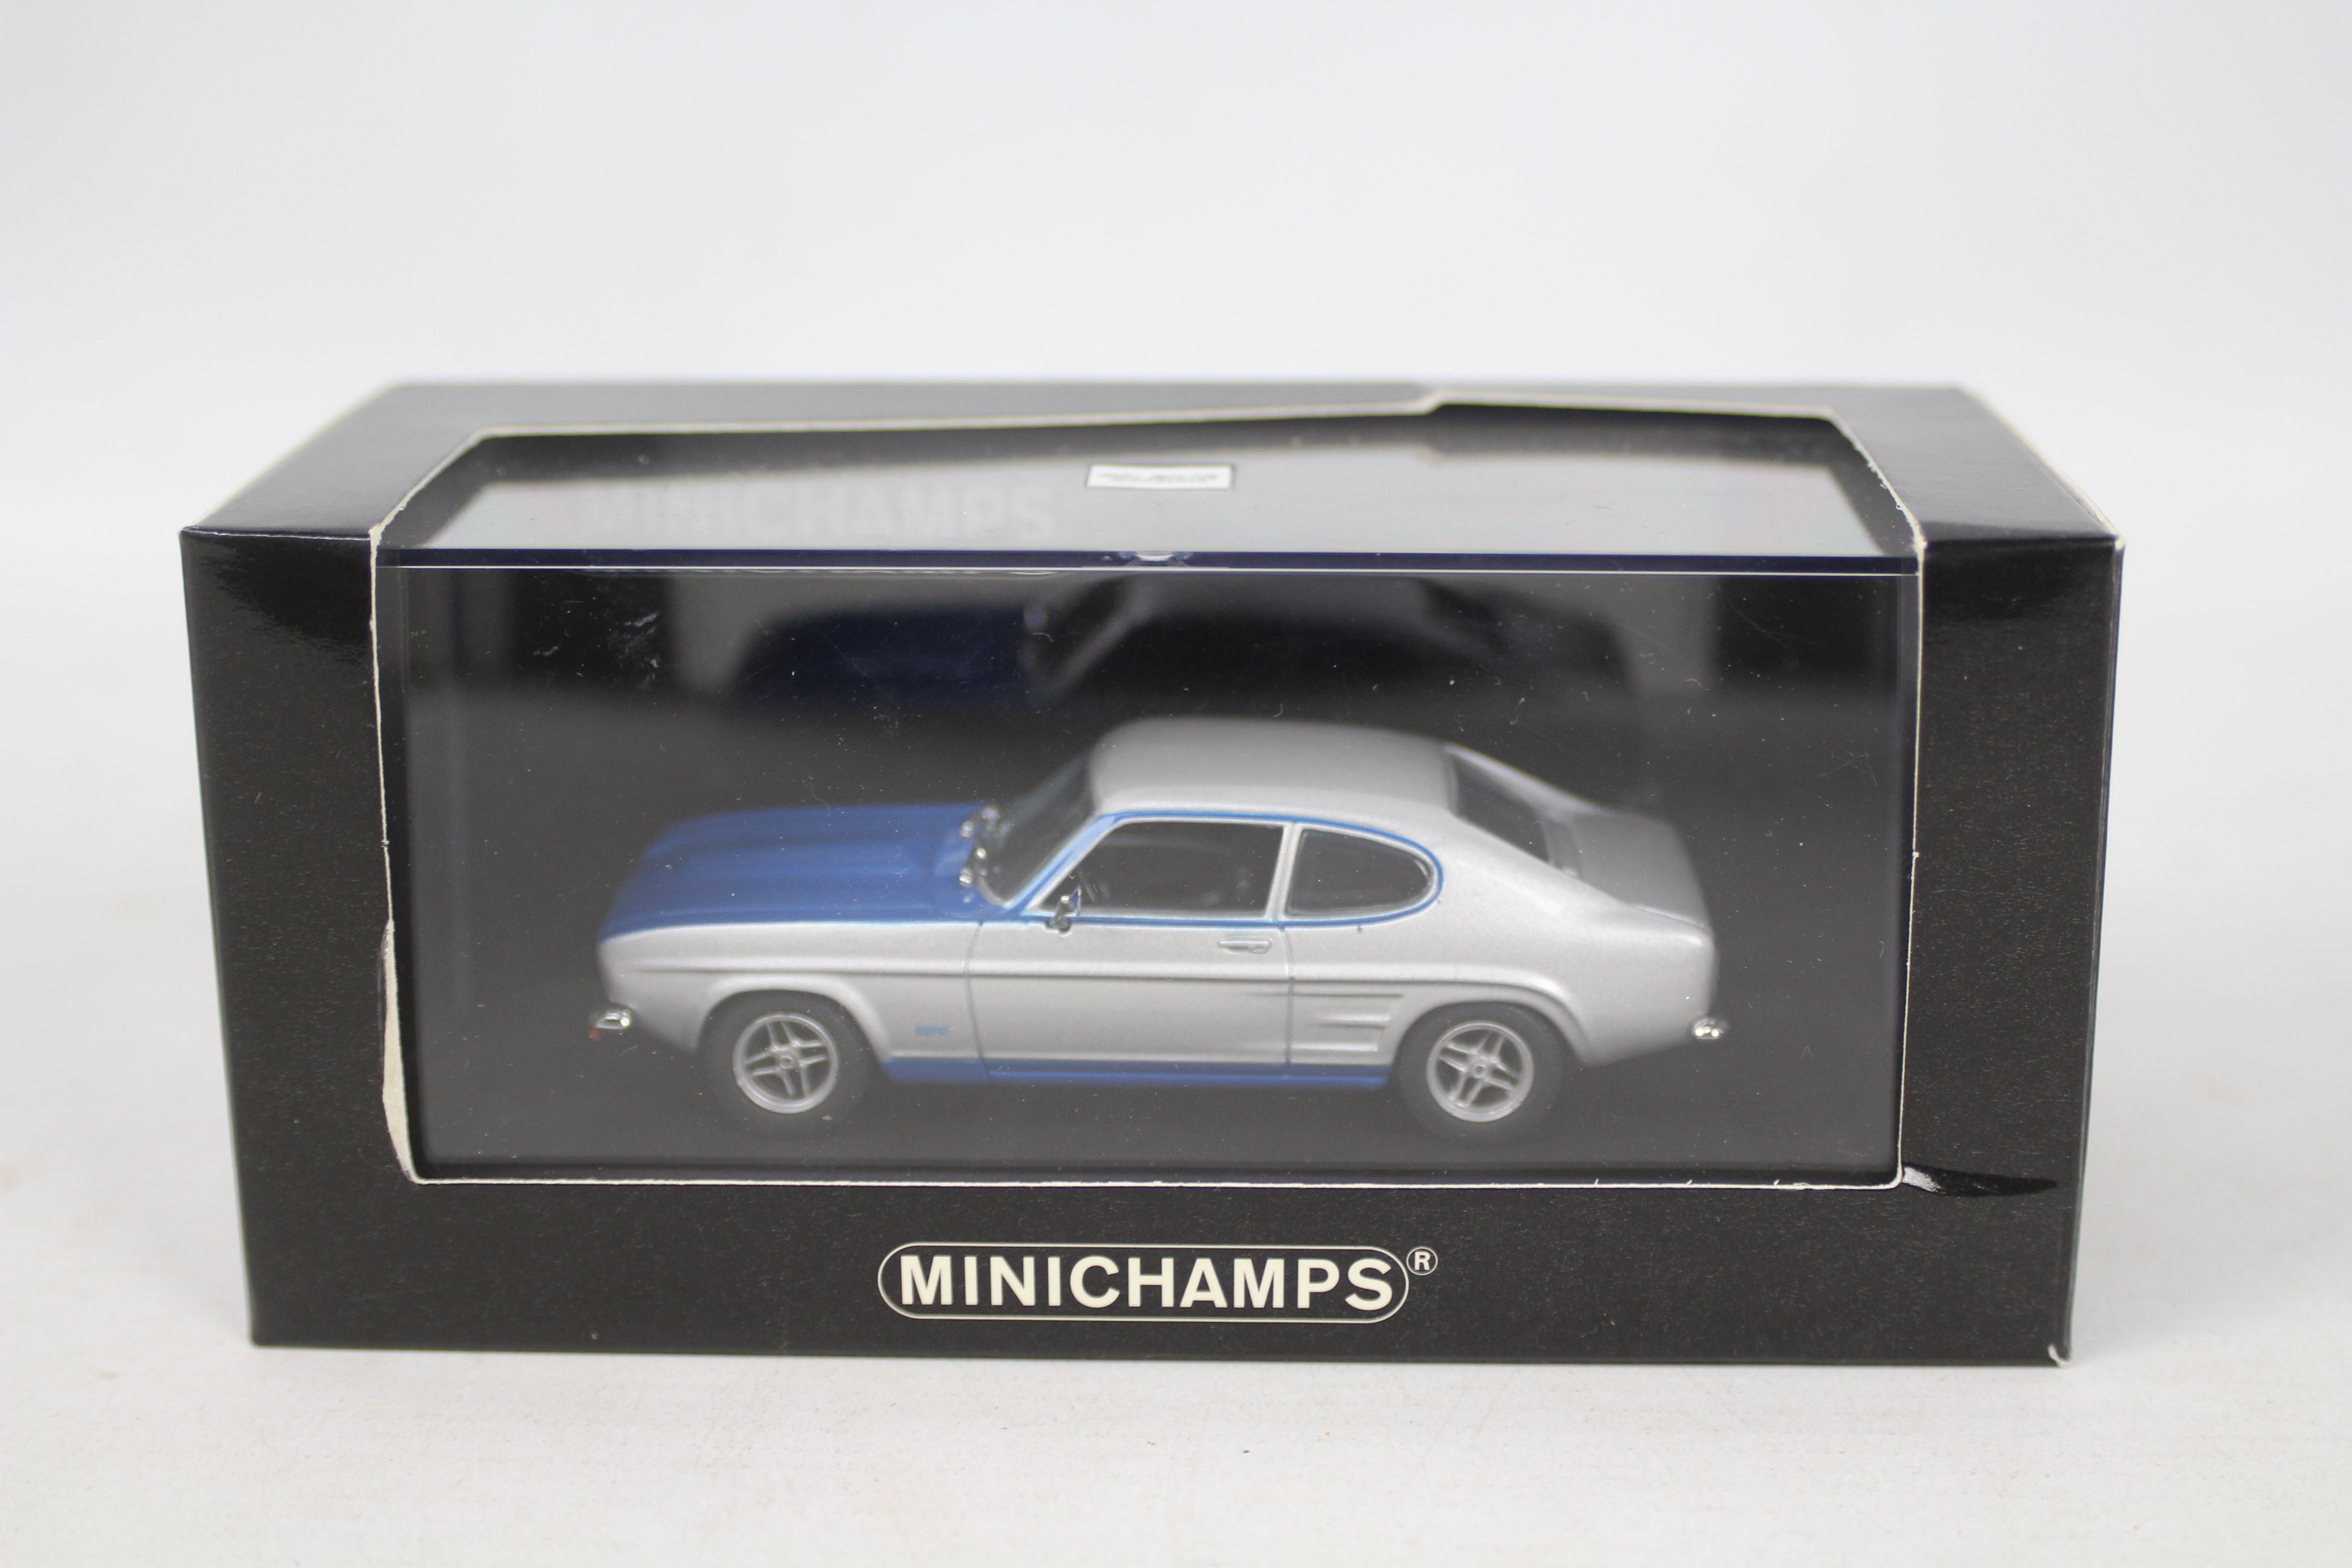 Minichamps - Two boxed Limited Edition 1:43 scale Minichamps Ford Capris. - Image 3 of 3